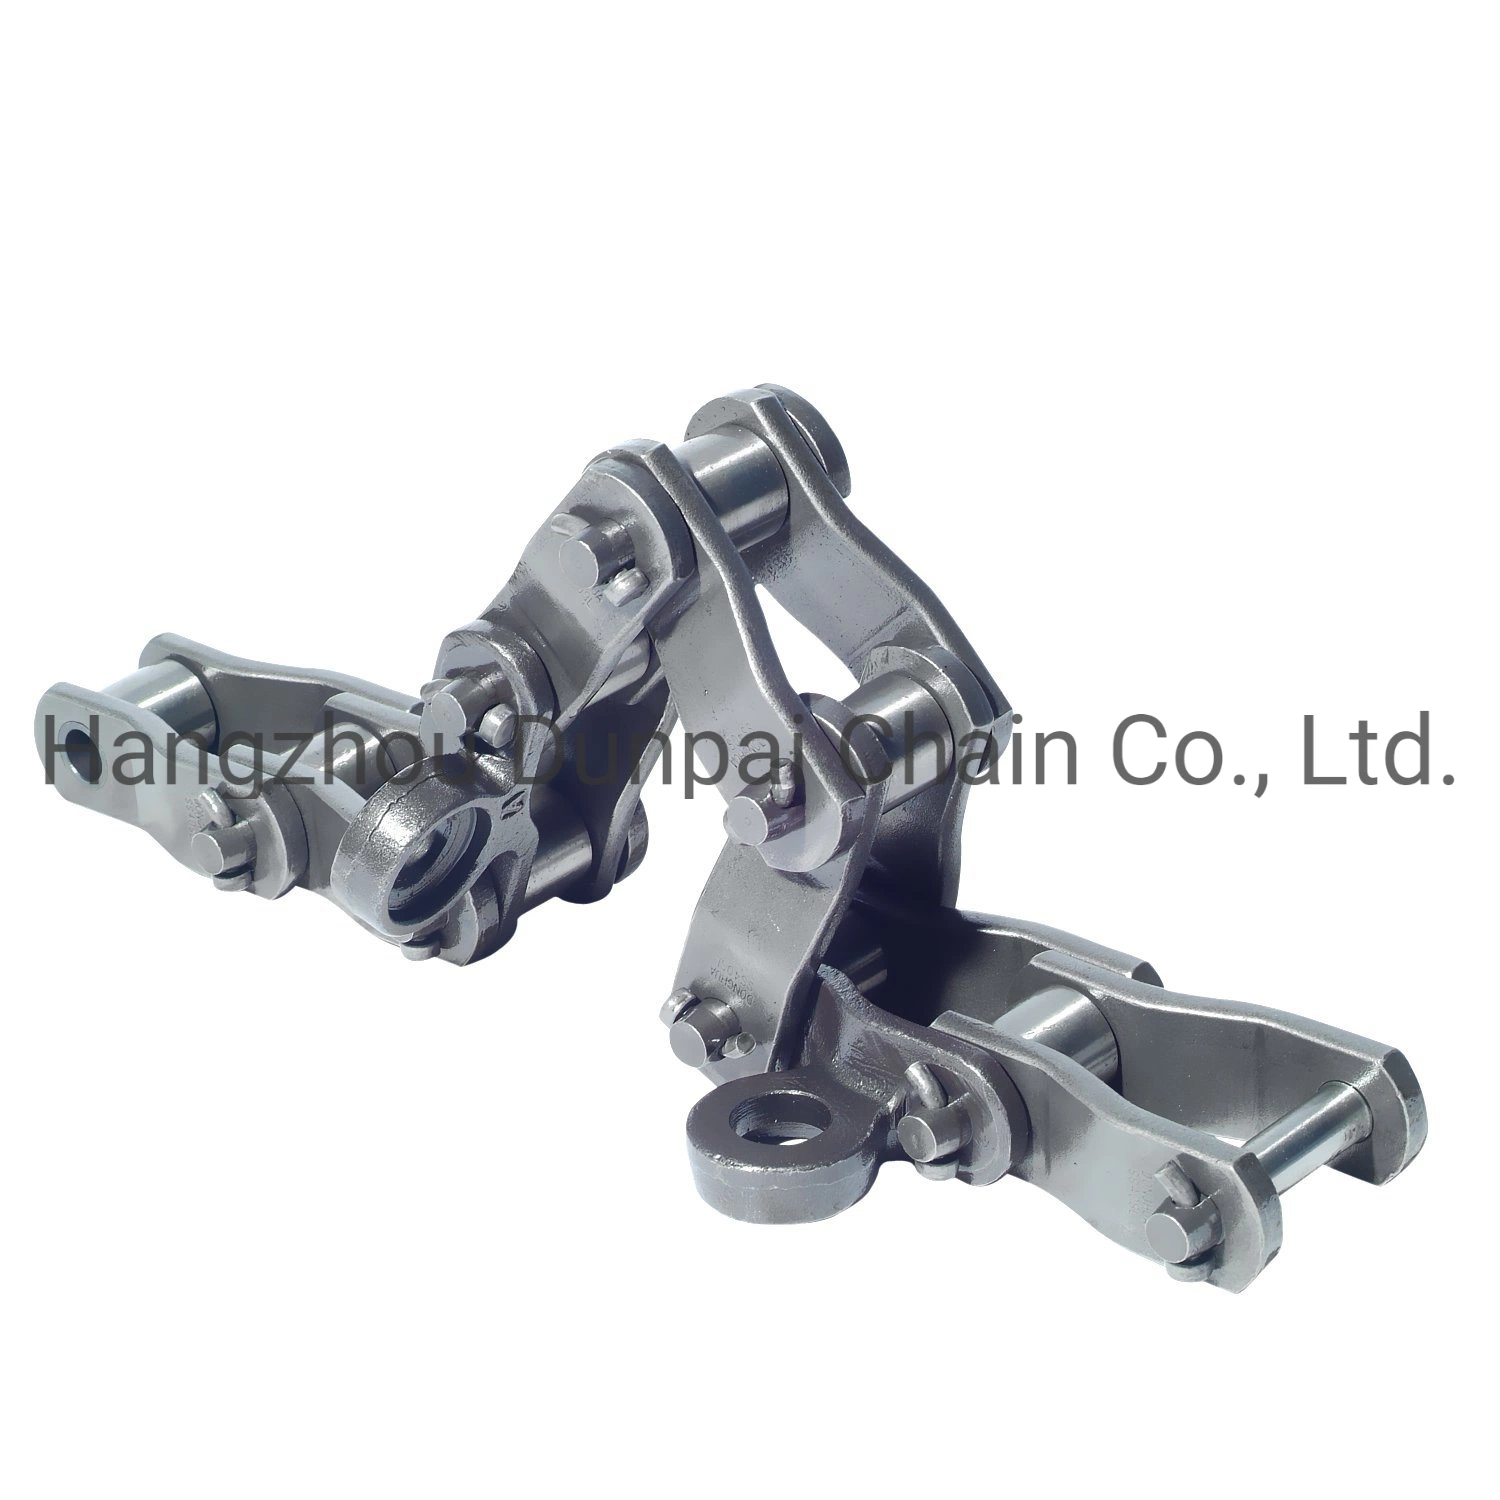 Transmission Industrial Conveyor Chain Roller Chain /Hollow Chain/Stainless Steel Pintle Chain/Motorcycle/Agricultural Chain